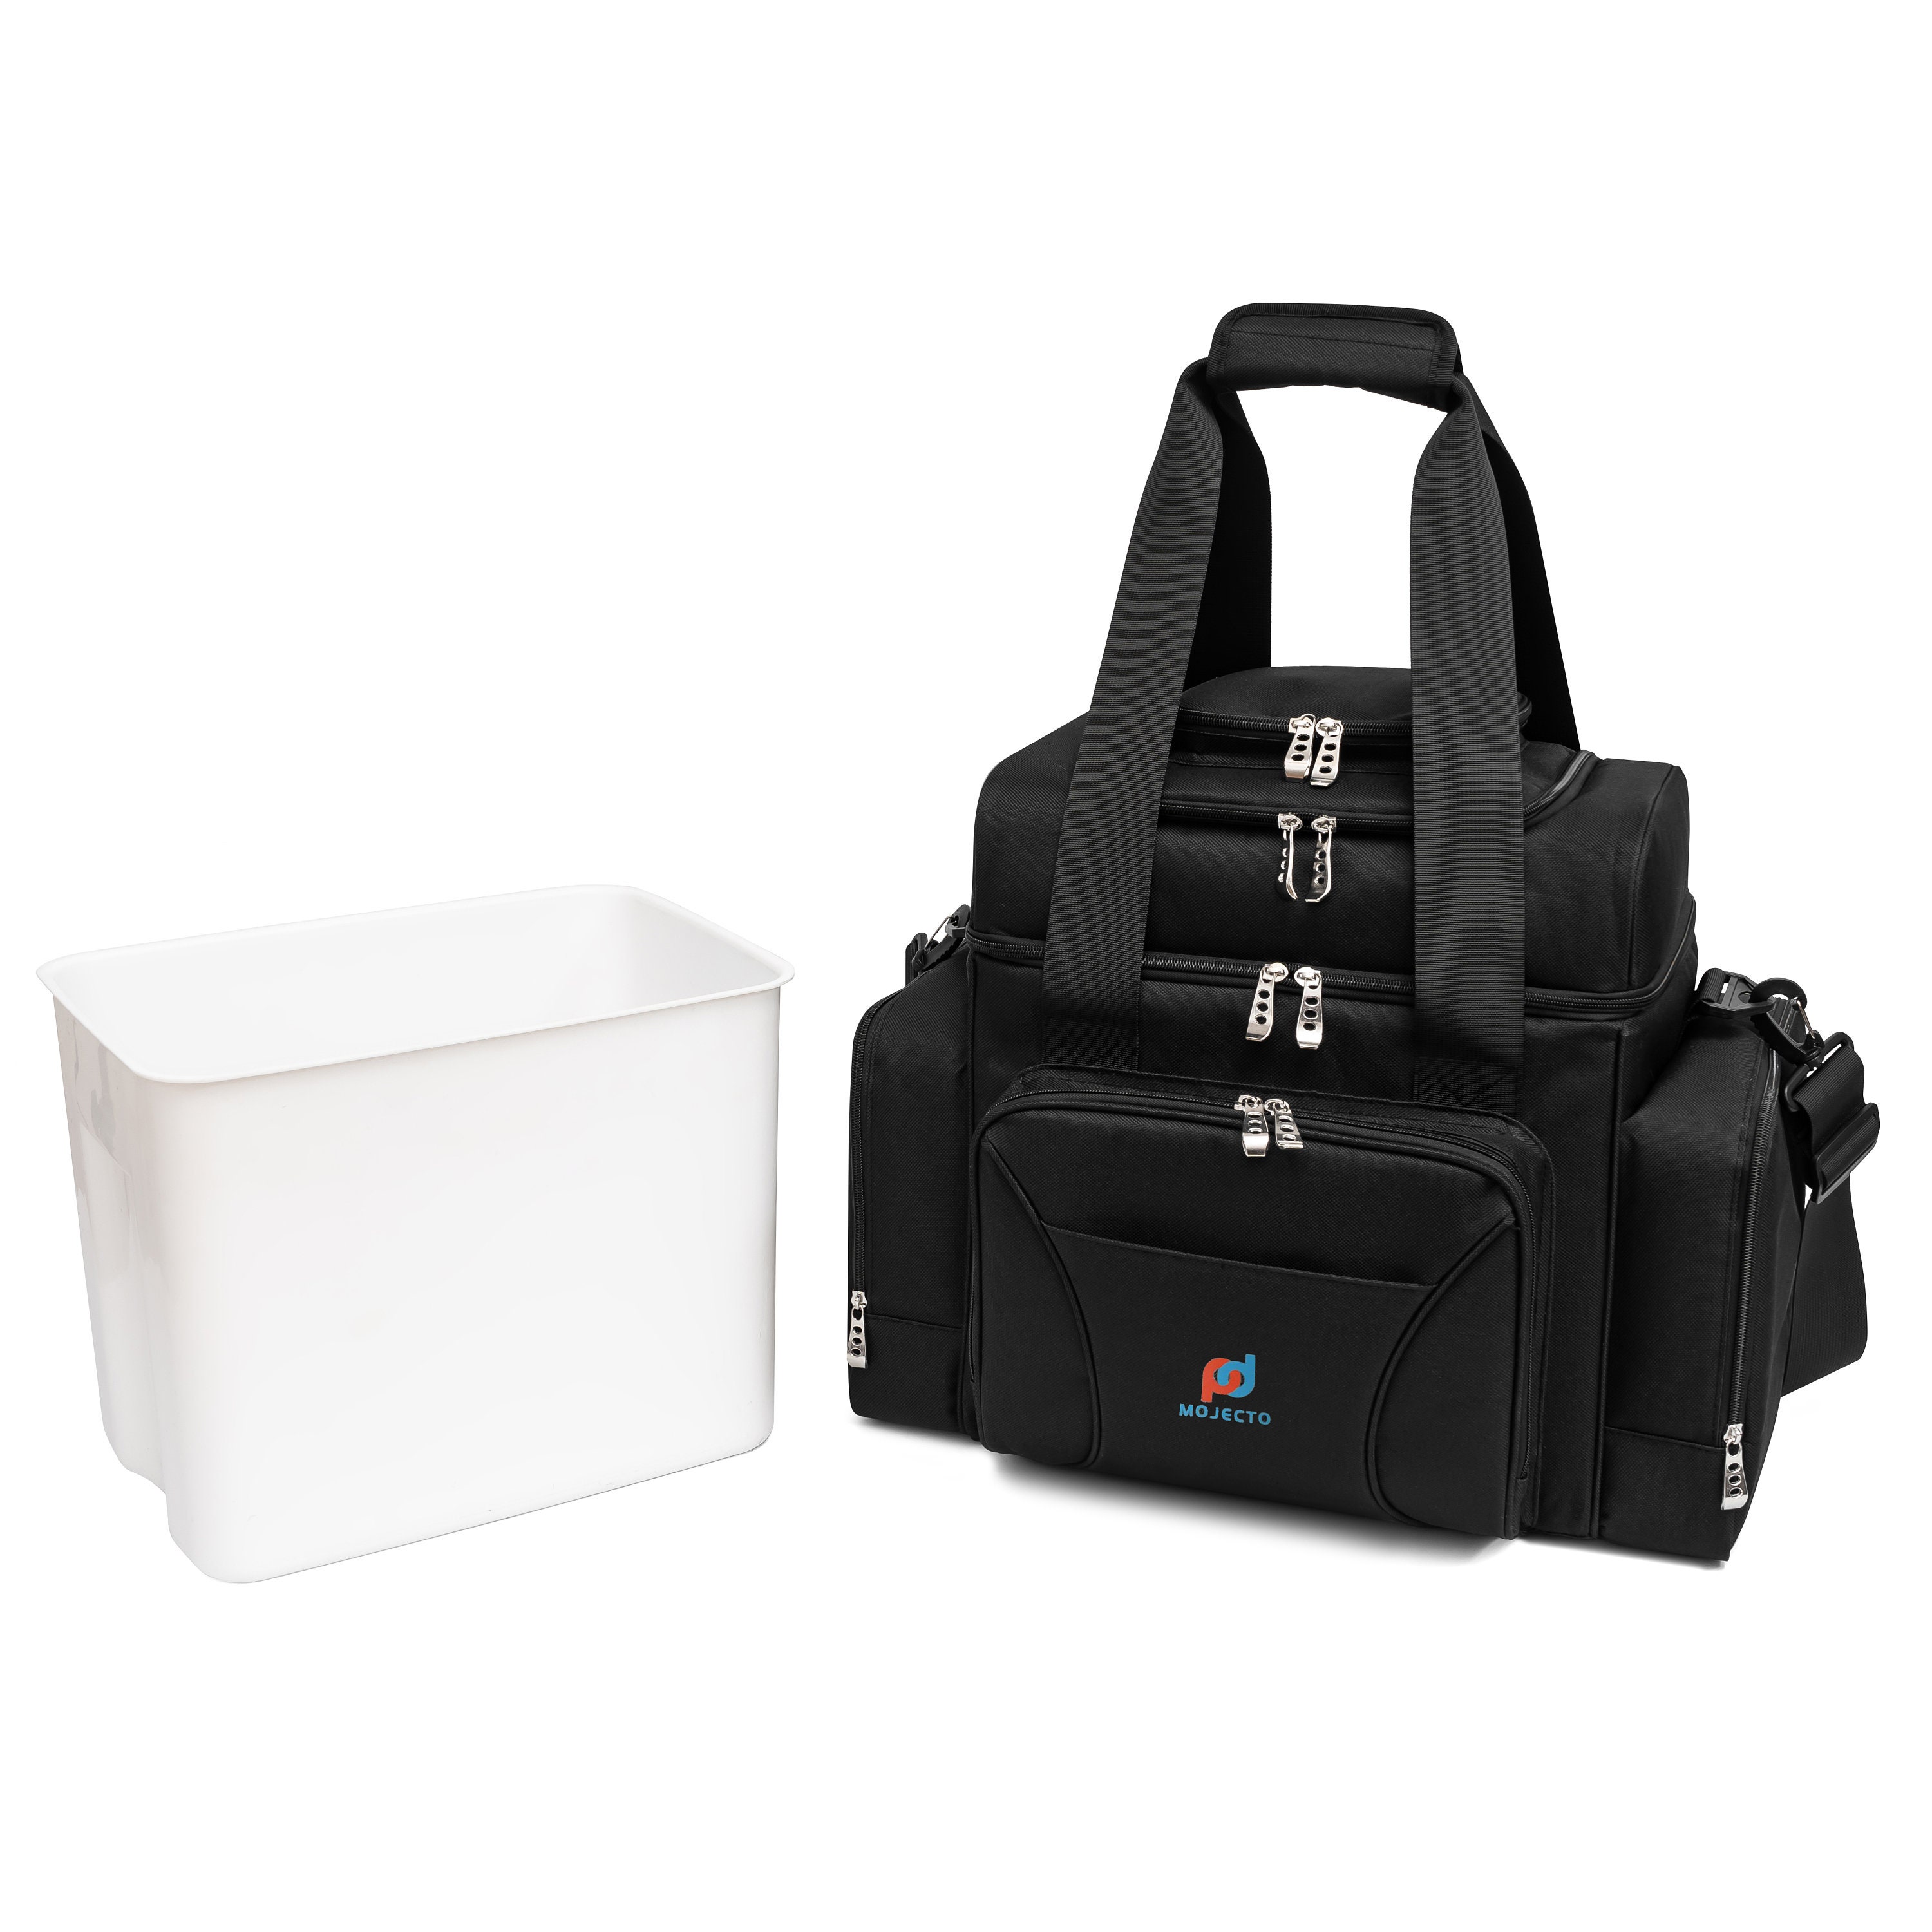 Large Cooler Bag (15x12.5x9 in) with Leakproof Hard Liner. Two Insulated Compartment, Heavy Duty Fabric, Thick Insulation, Reinforced Stiches